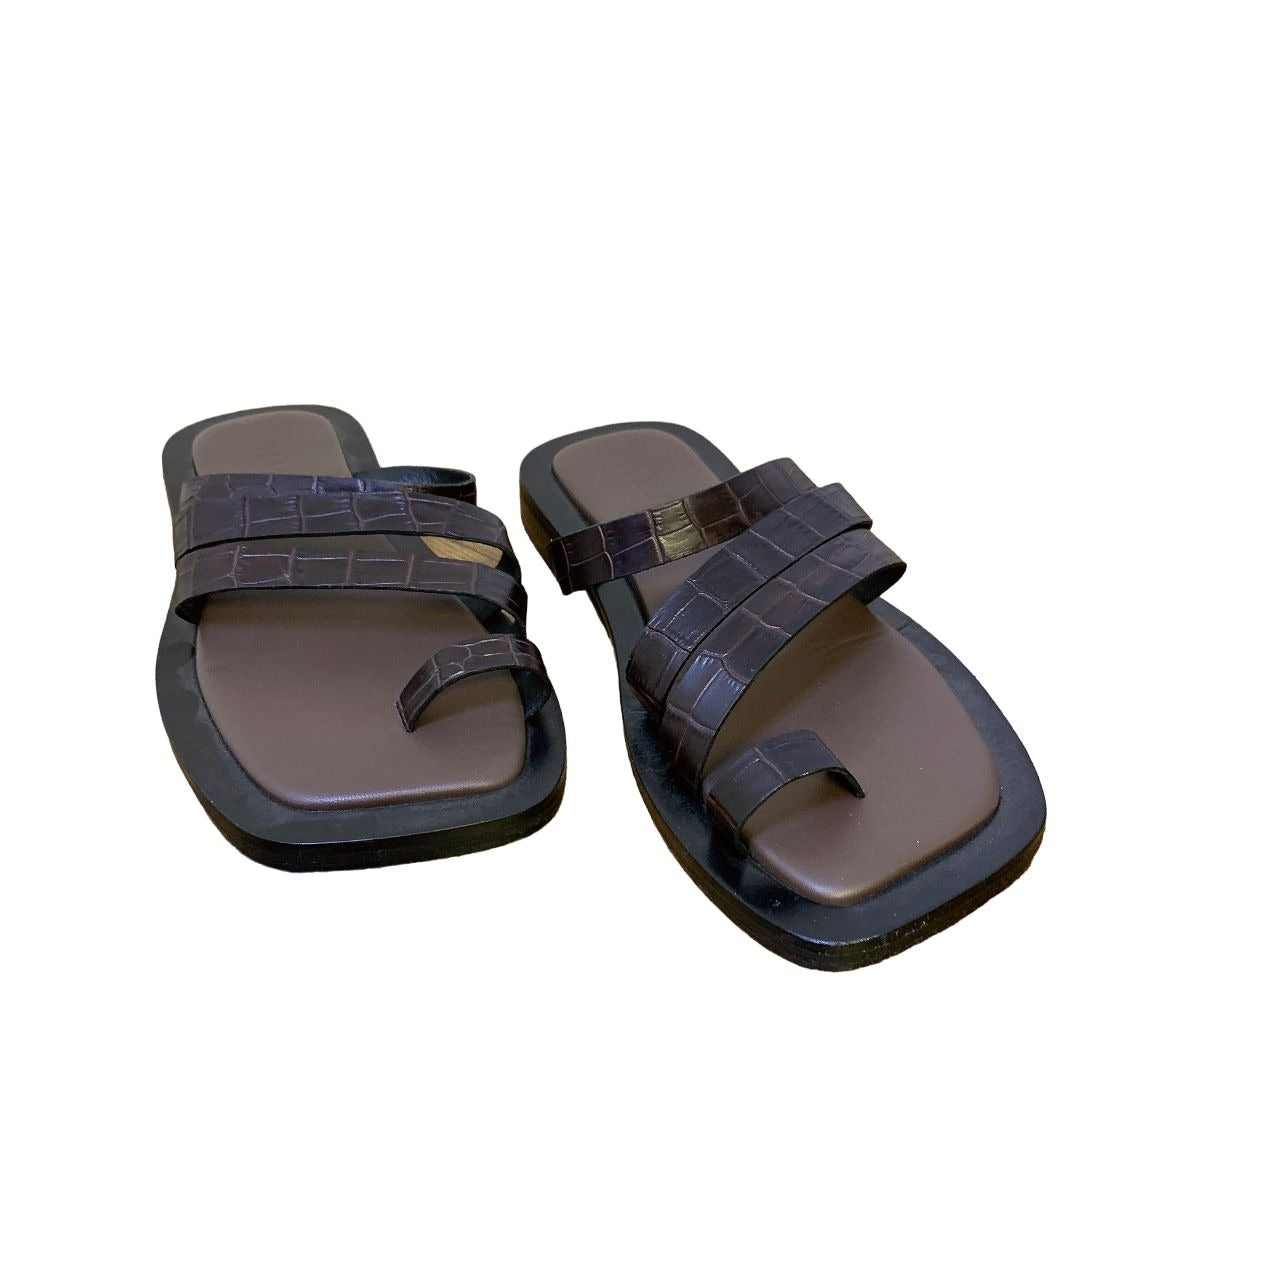 *A. Emery Brown Leather Sandals Size 7.5